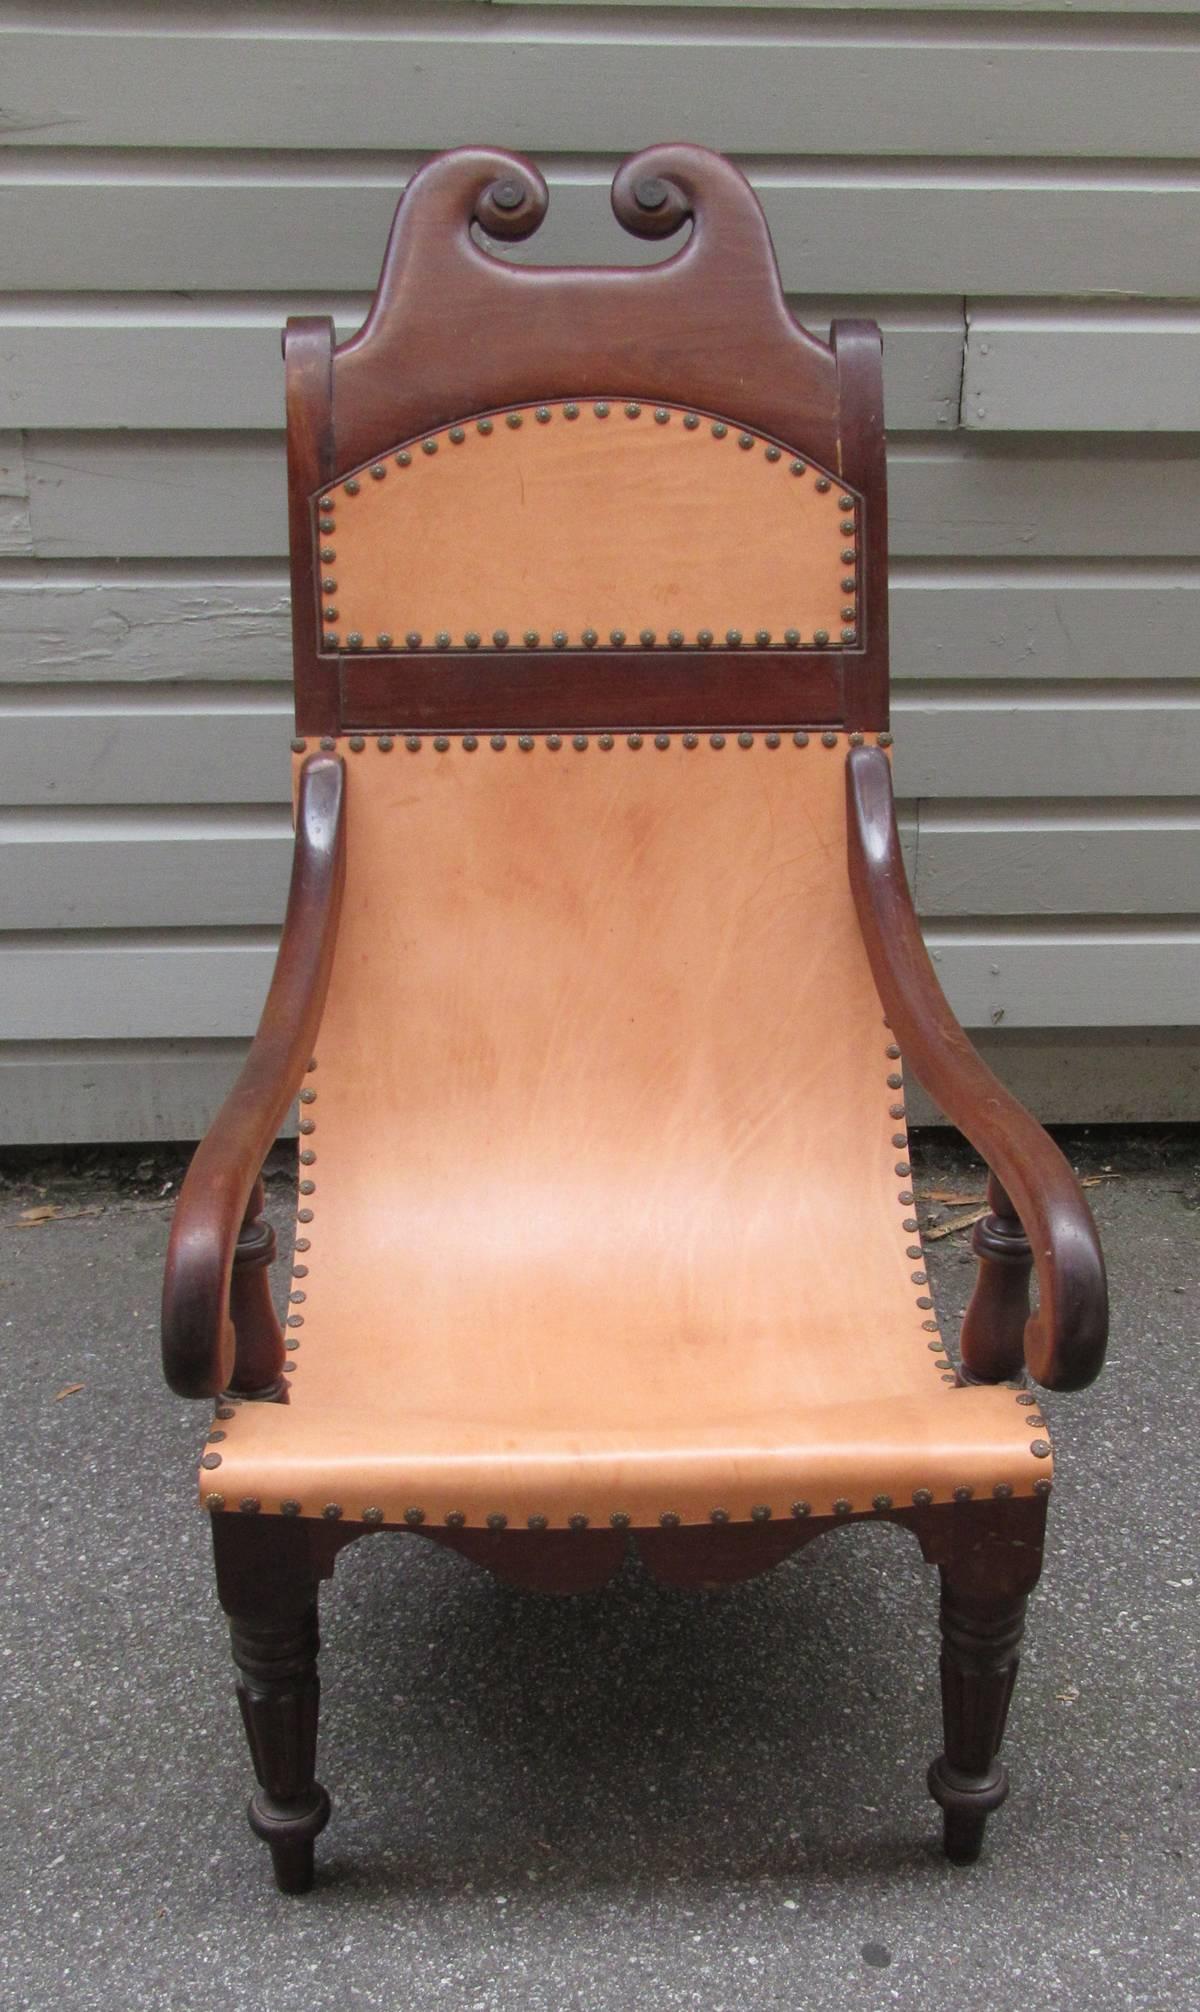 This elegant British Colonial 1810-1830 Campeche chair is made of solid mahogany and was known in Jamaica as a Spanish chair in the period. This West Indies Planter chair is one of the finest examples of this Regency Form made in the Caribbean. The